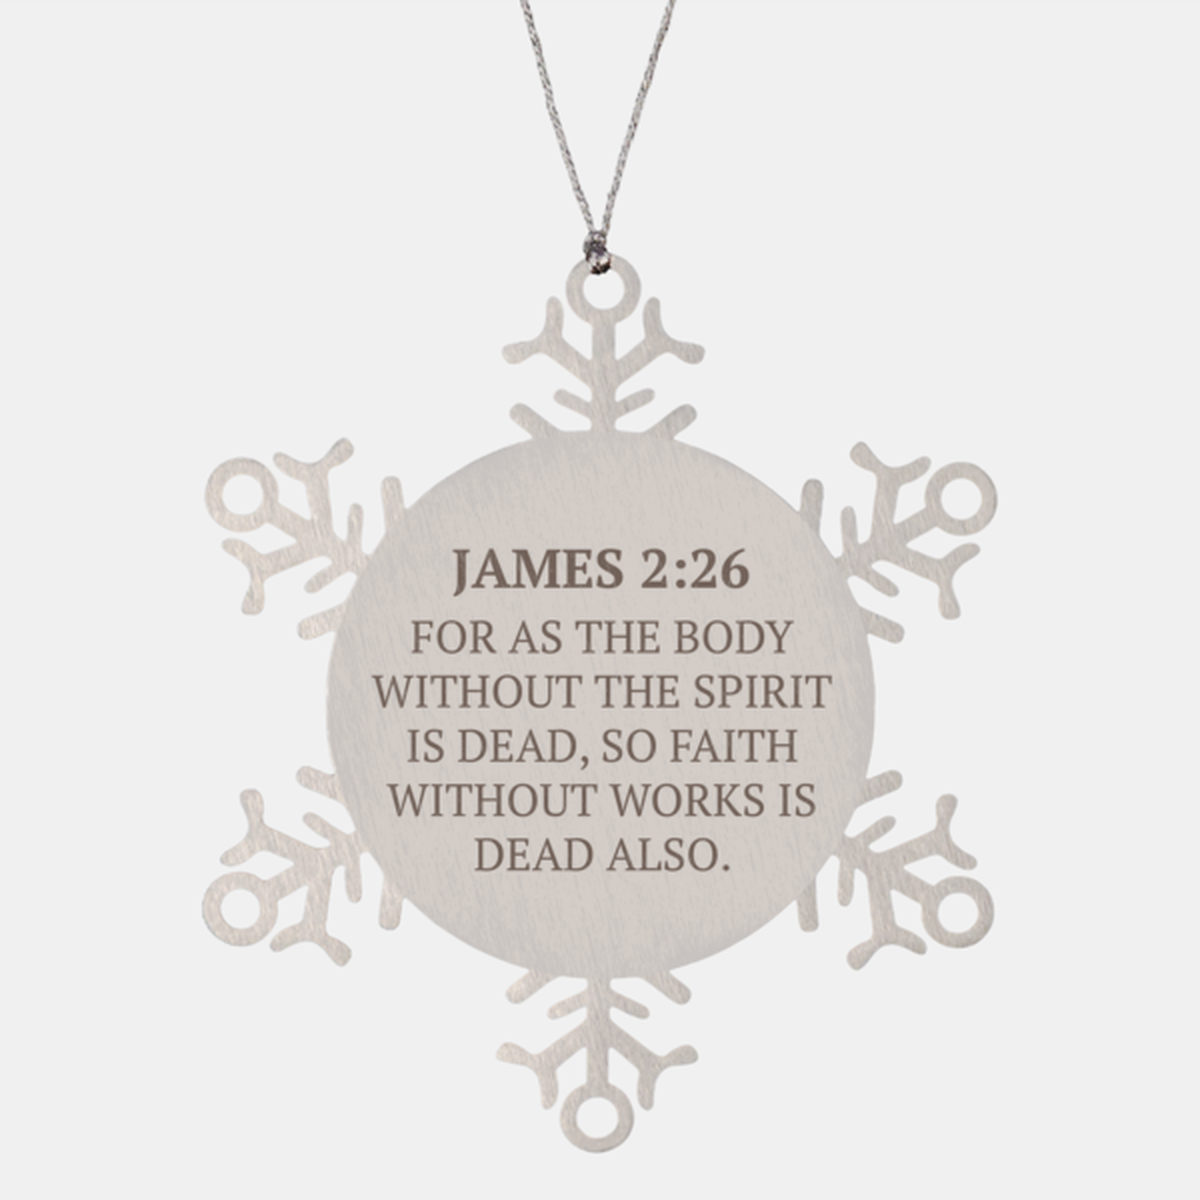 Christian Ornaments For Christmas Tree, For As The Body Without The Spirit Is Dead, Religious Christmas Decorations, Scripture Ornaments Gifts, Bible Verse Ornament